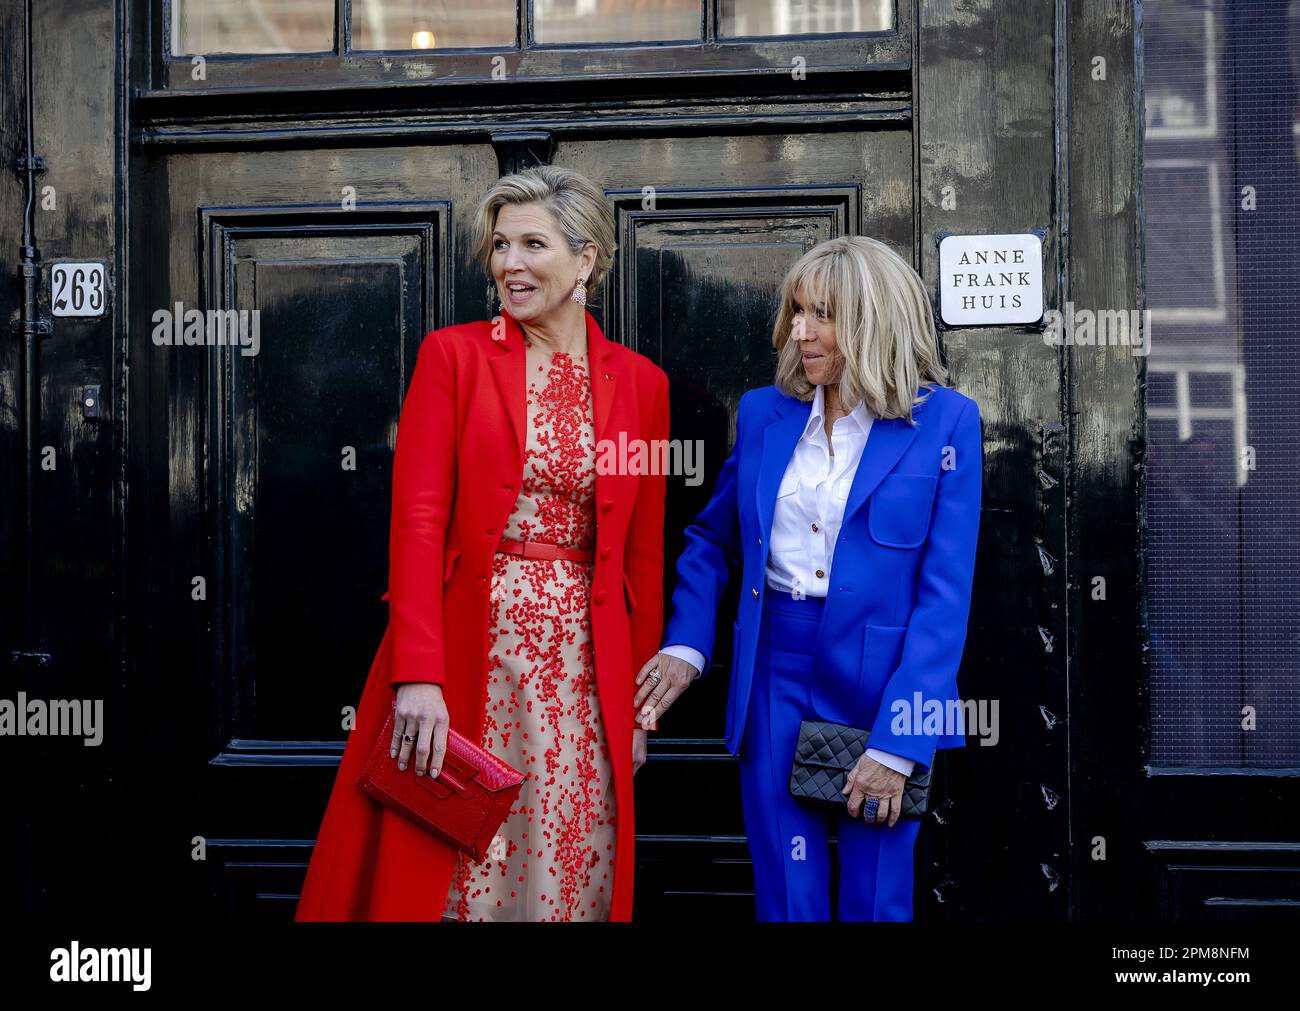 Amsterdam, Netherlands. 12th April, 2023. AMSTERDAM - The French first lady Brigitte Macron (r) and Queen Maxima visit the Anne Frank House. The French presidential couple is paying a two-day state visit to the Netherlands. ANP POOL ROBIN VAN LONKHUIJSEN netherlands out - belgium out Credit: ANP/Alamy Live News Credit: ANP/Alamy Live News Stock Photo